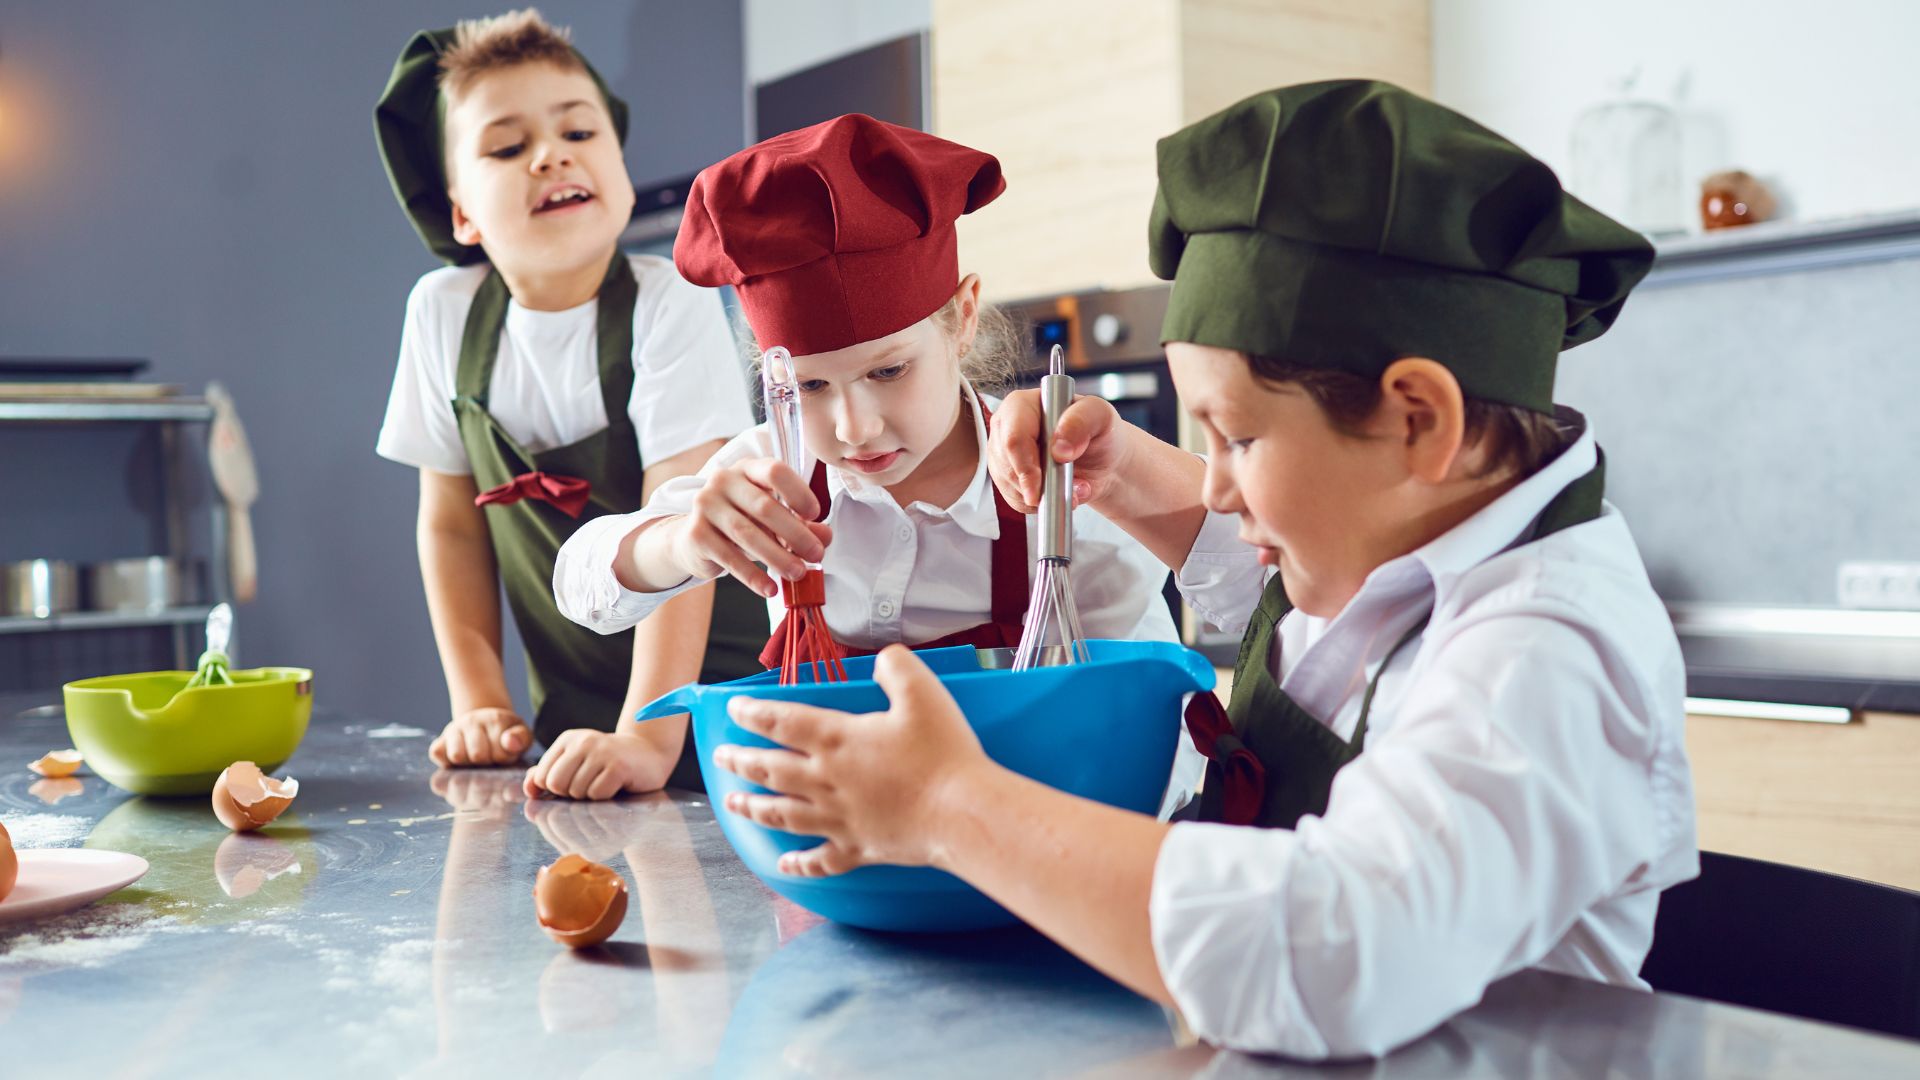 7 Educational and Fun Pancake Day Activities for Schools